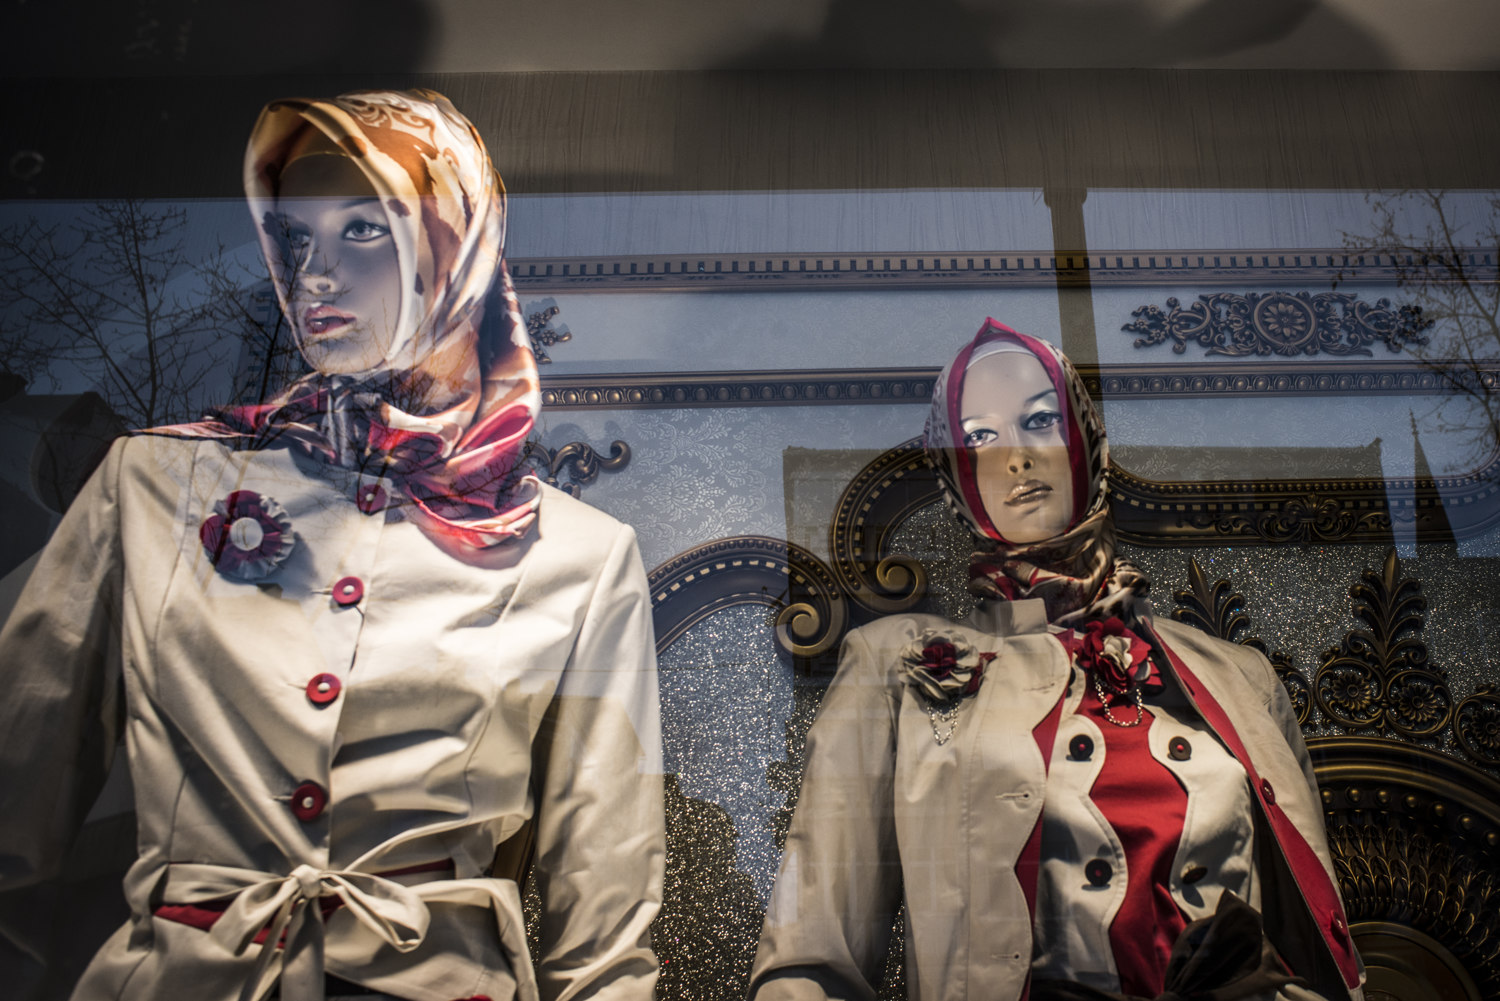  Mannequins places in store windows in the Fatih district of Istanbul, Turkey. Fatih is known as one of the most conservative districts in the city. 